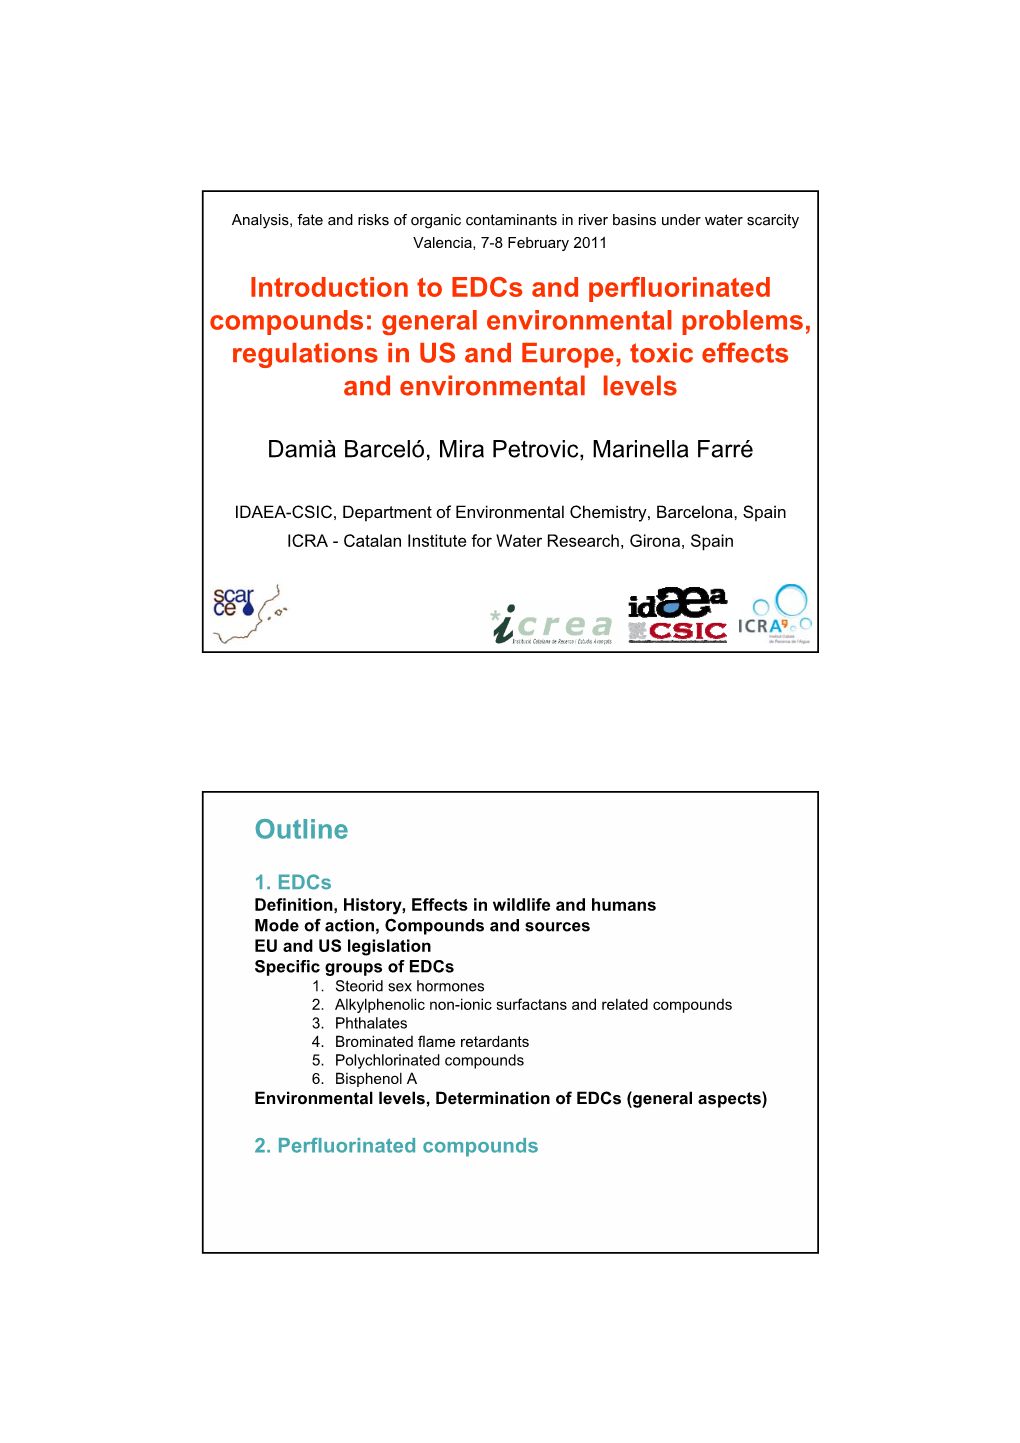 Introduction to Edcs and Perfluorinated Compounds: General Environmental Problems, Regulations in US and Europe, Toxic Effects and Environmental Levels